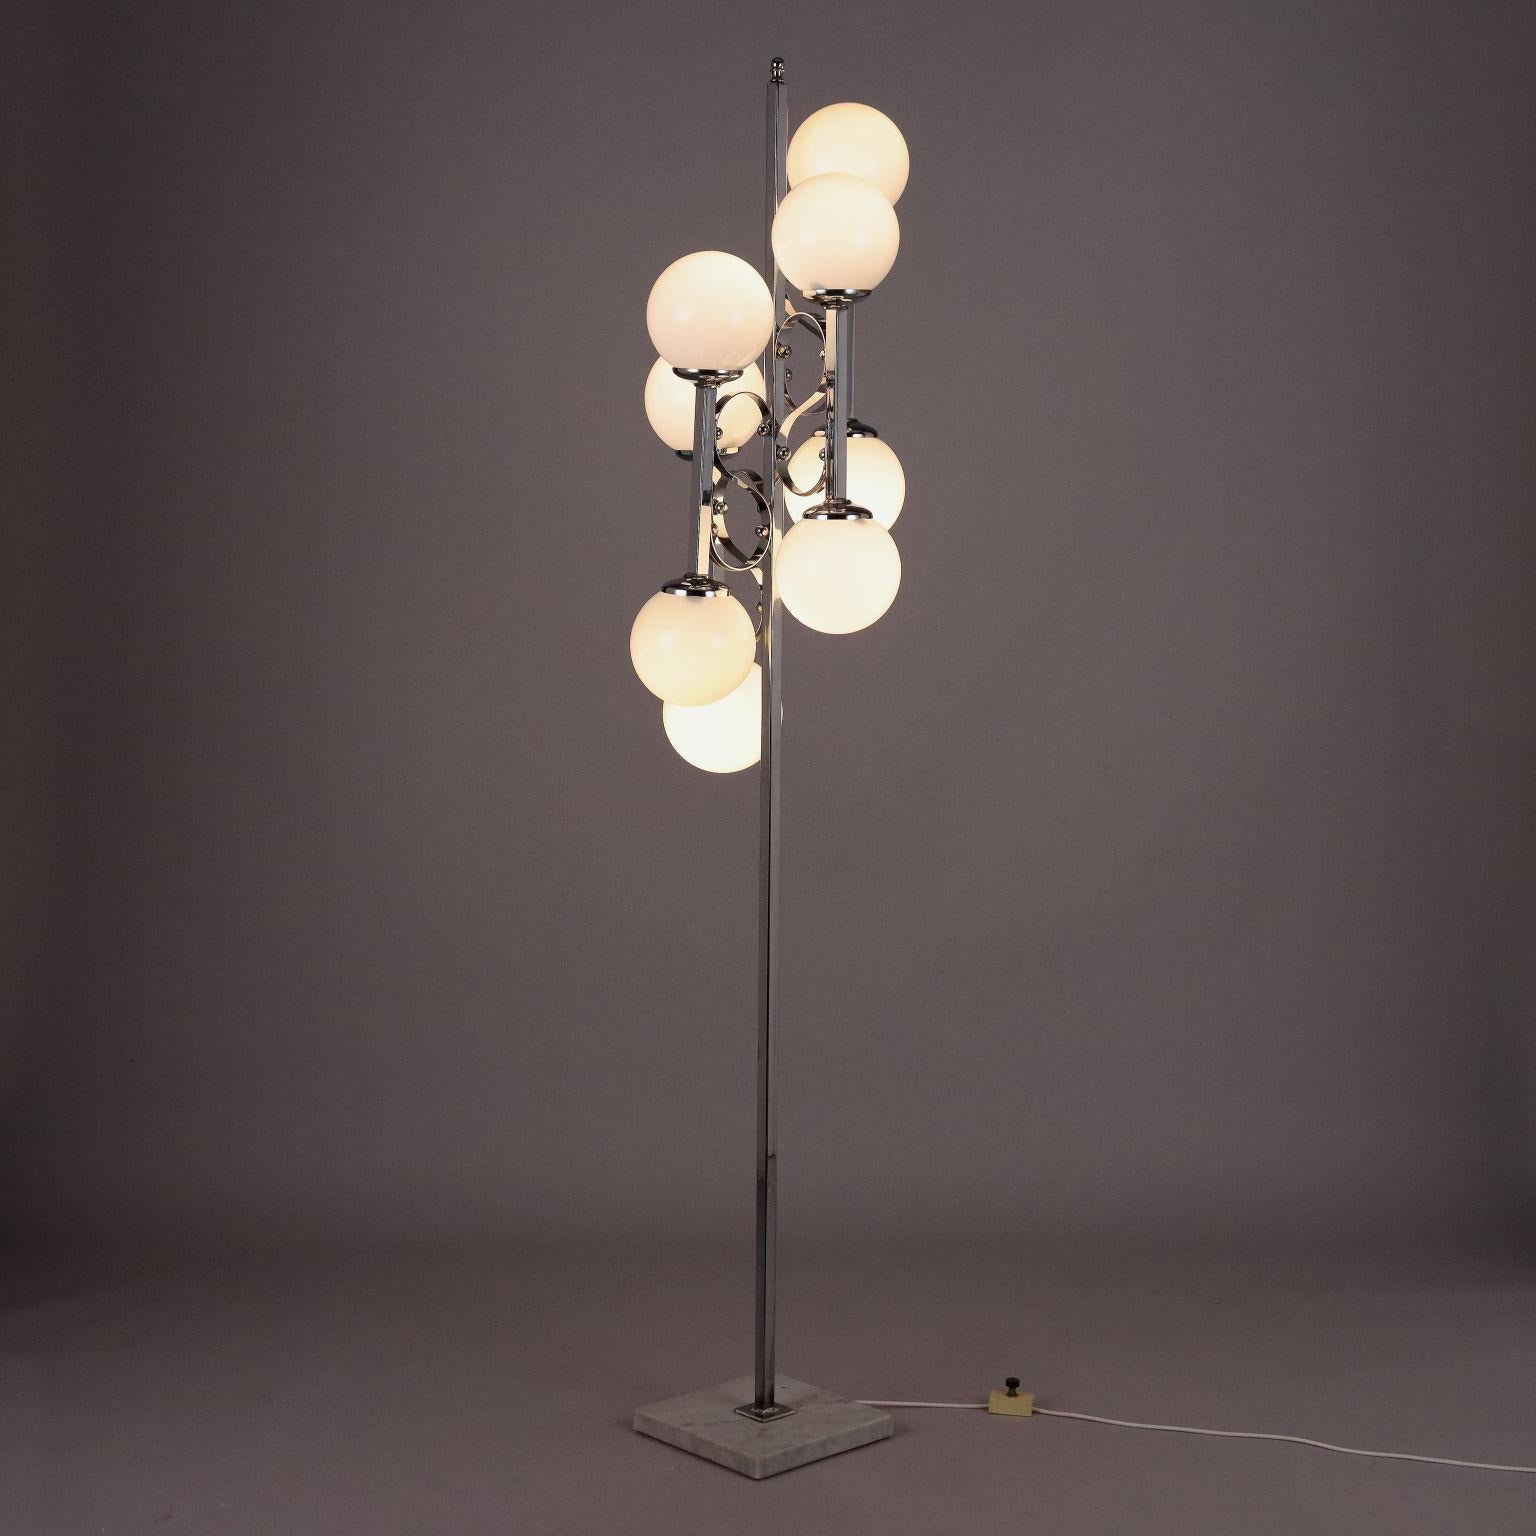 Floor lamp with 3 lighting options. Chrome metal, marble, glass bowls. Good conditions.